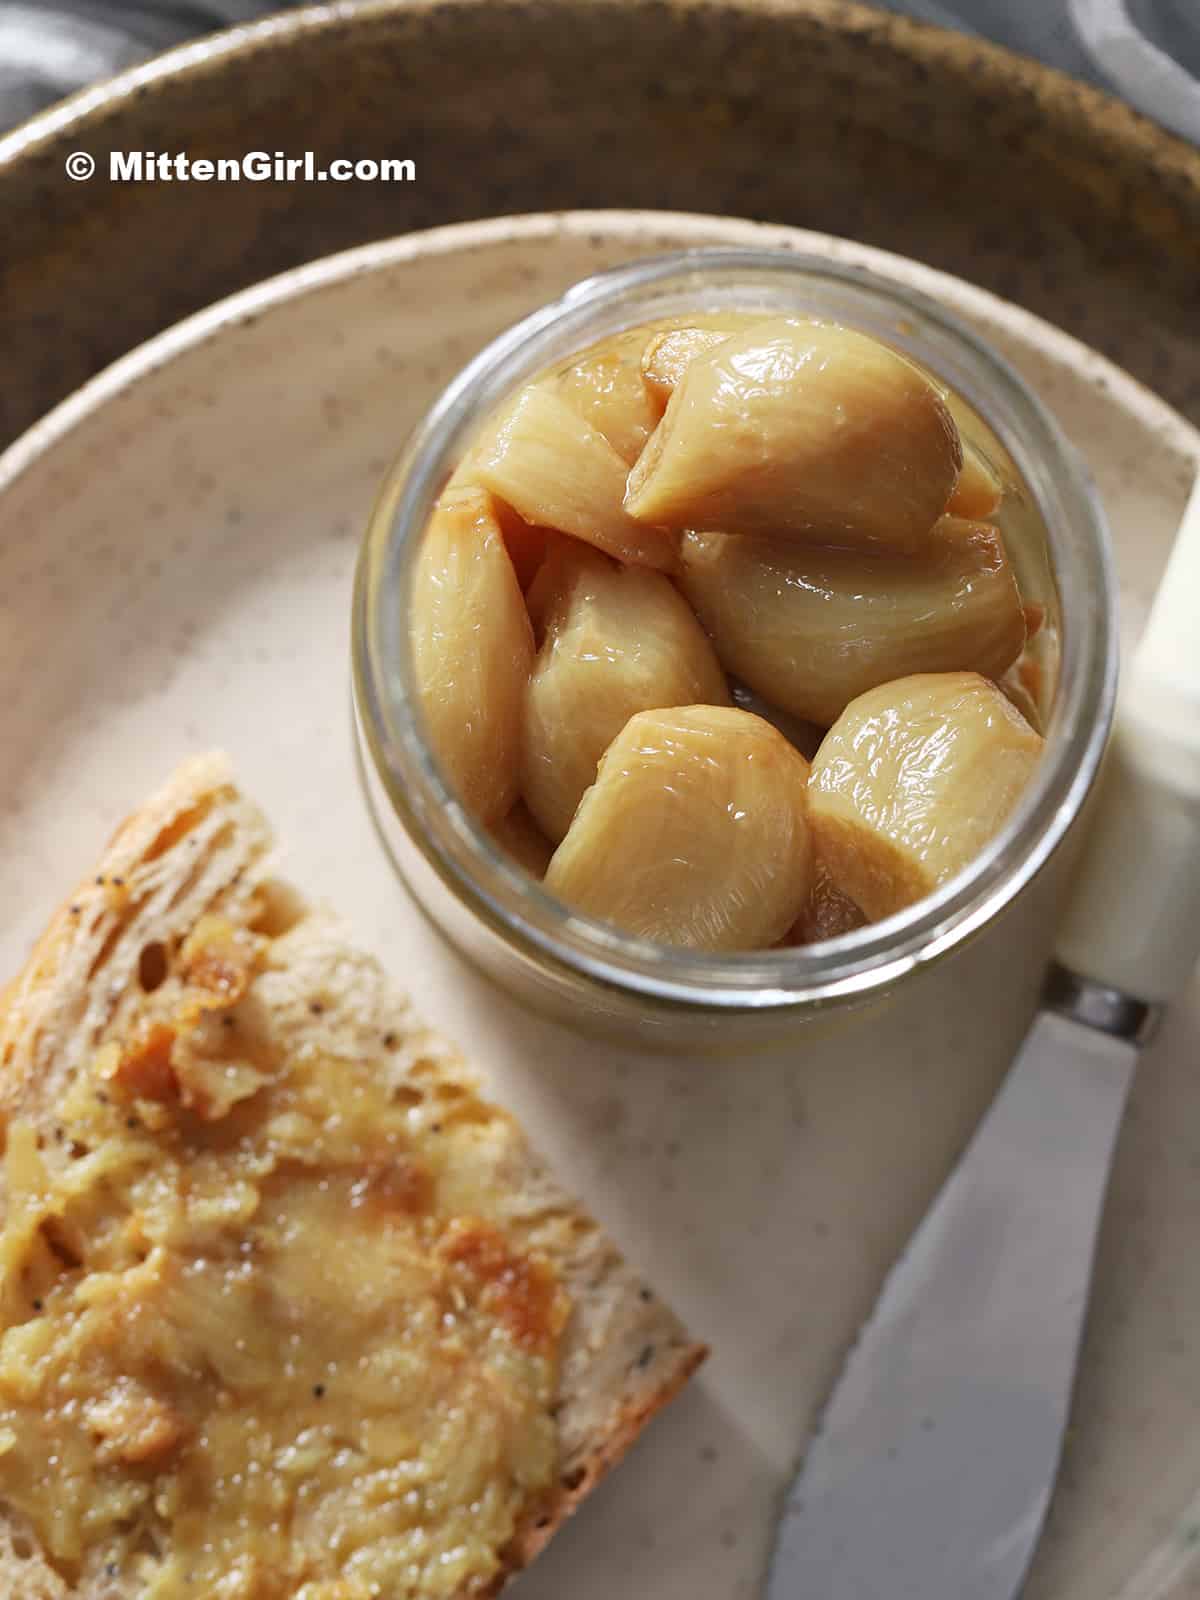 A jar of roasted garlic cloves next to a slice of bread and a spreader.